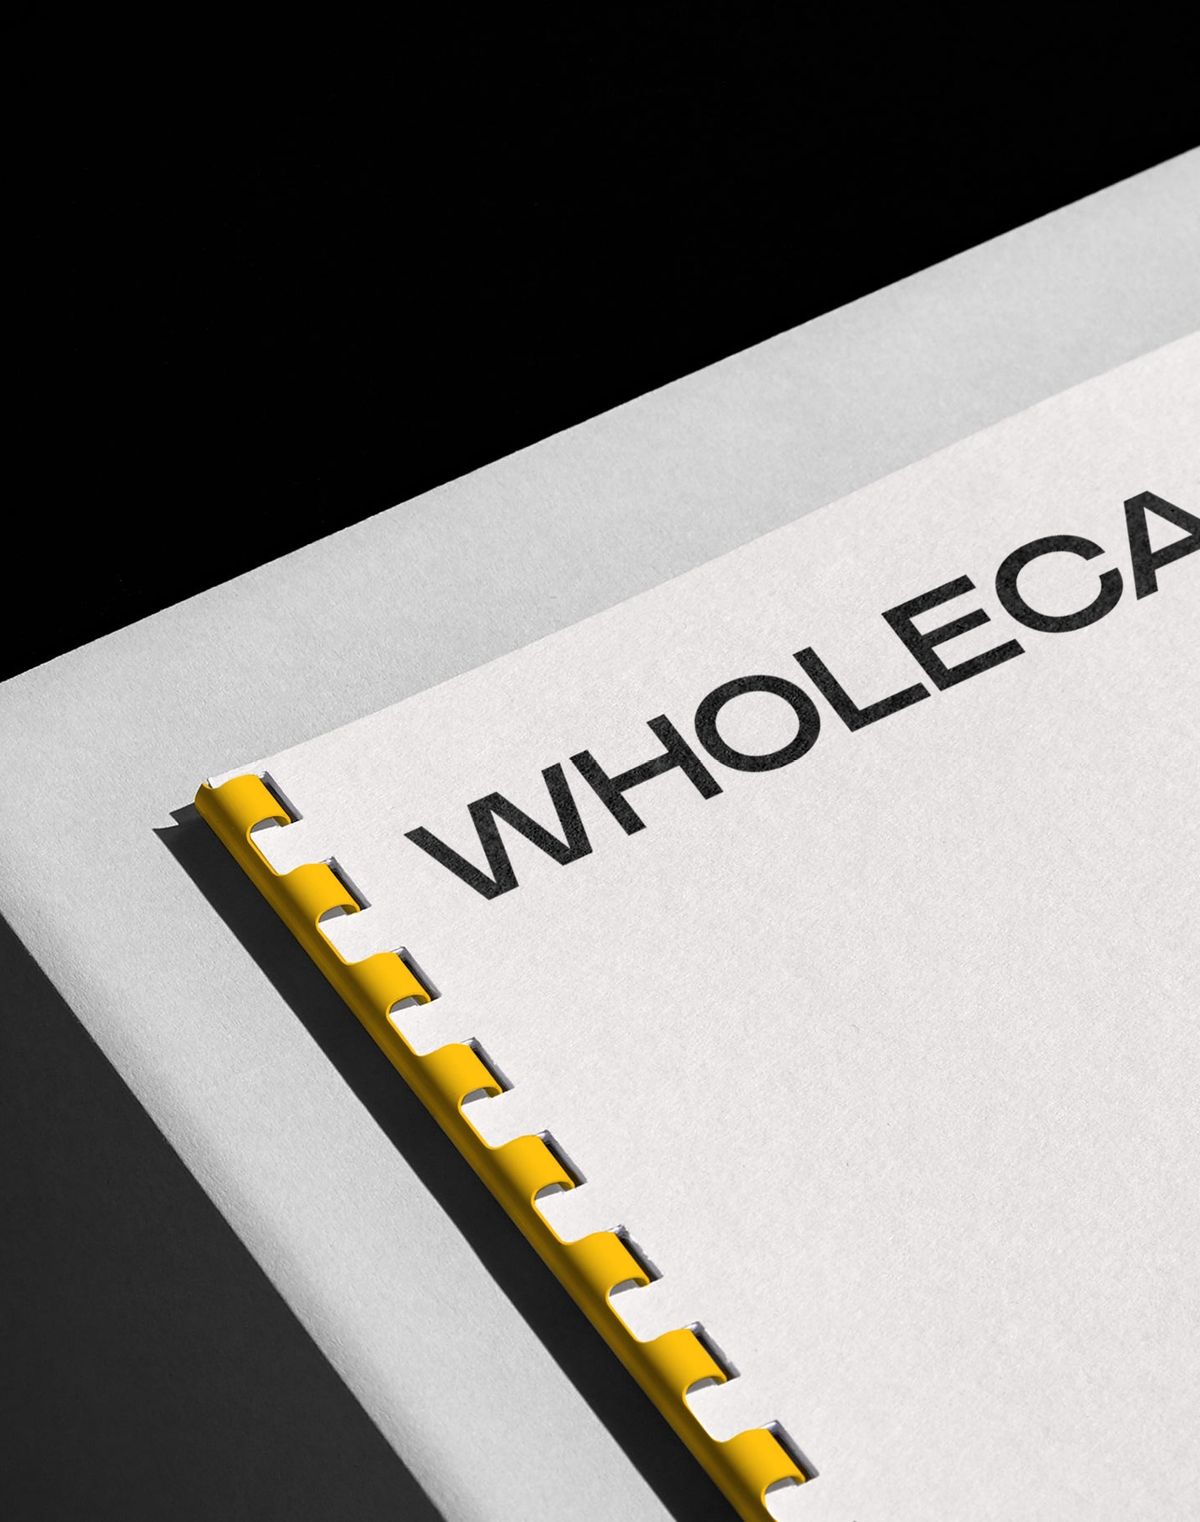 Wholecap - Brand and Website Design - Financial Capital Raising Ring Bound Documents | Atollon - a design company